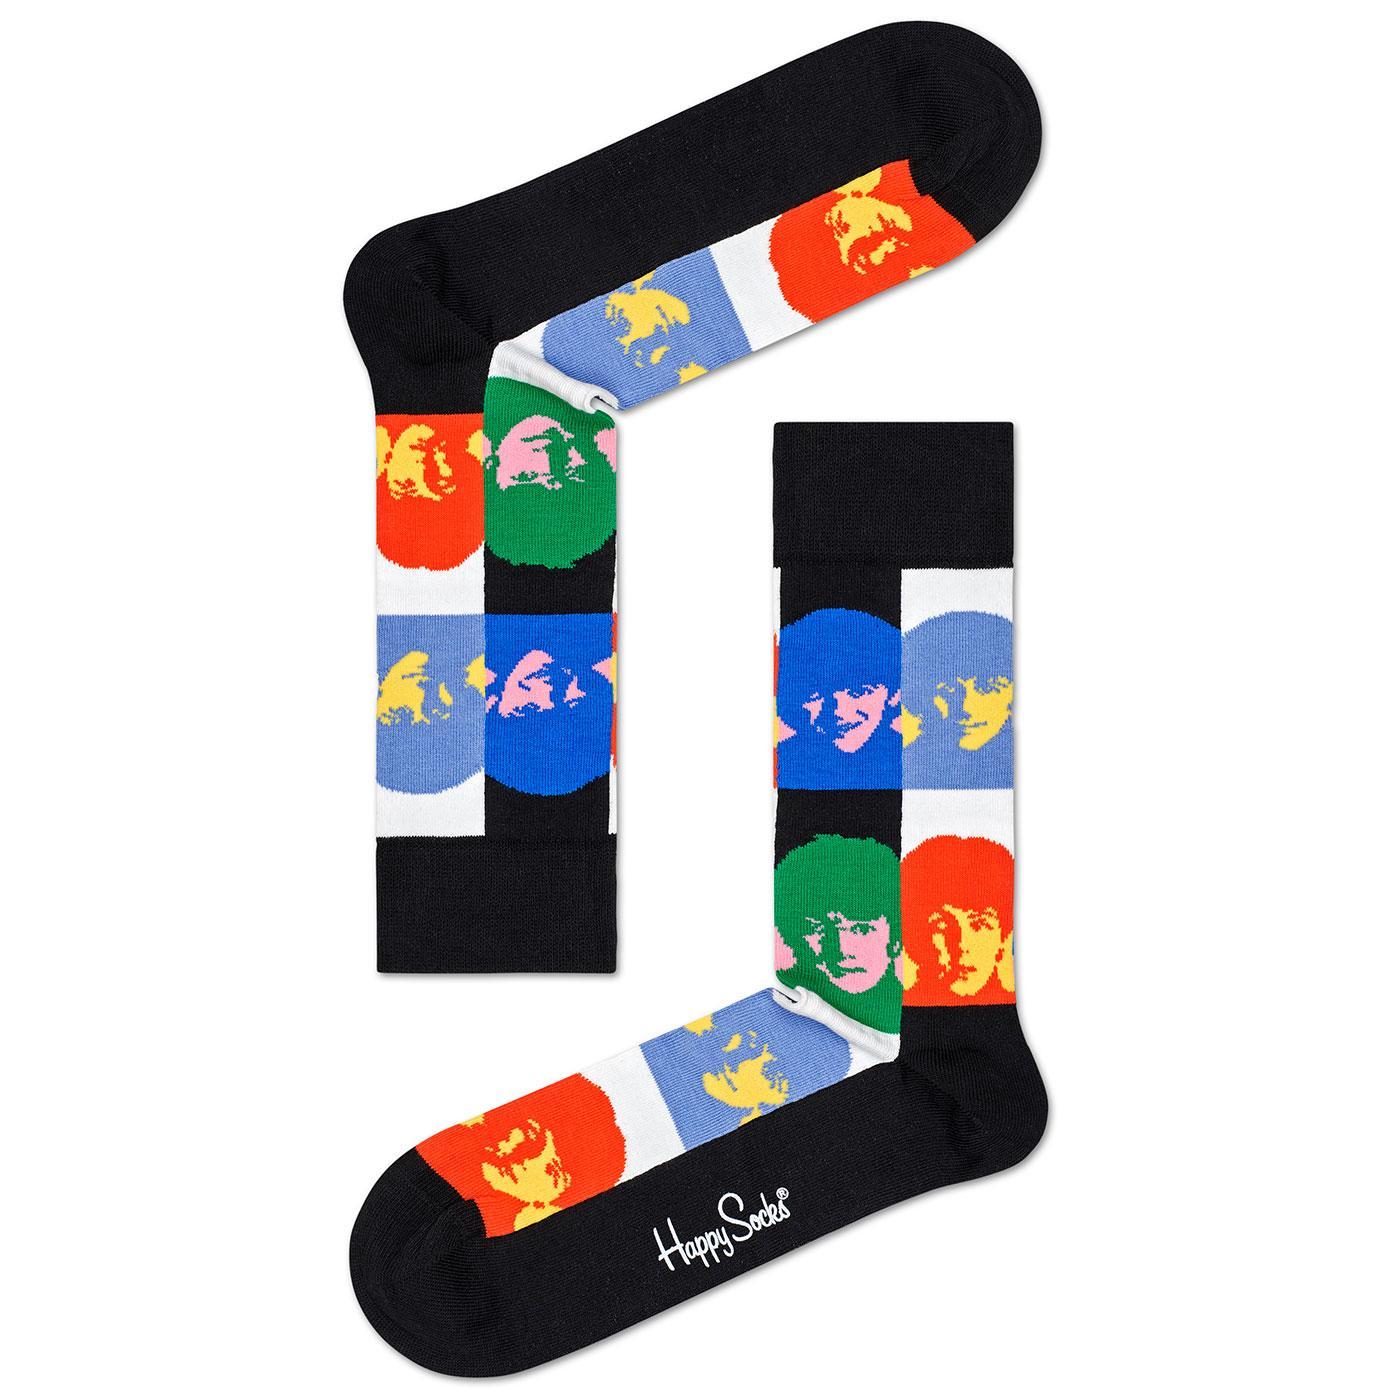 + HAPPY SOCKS x THE BEATLES All Together Now Socks